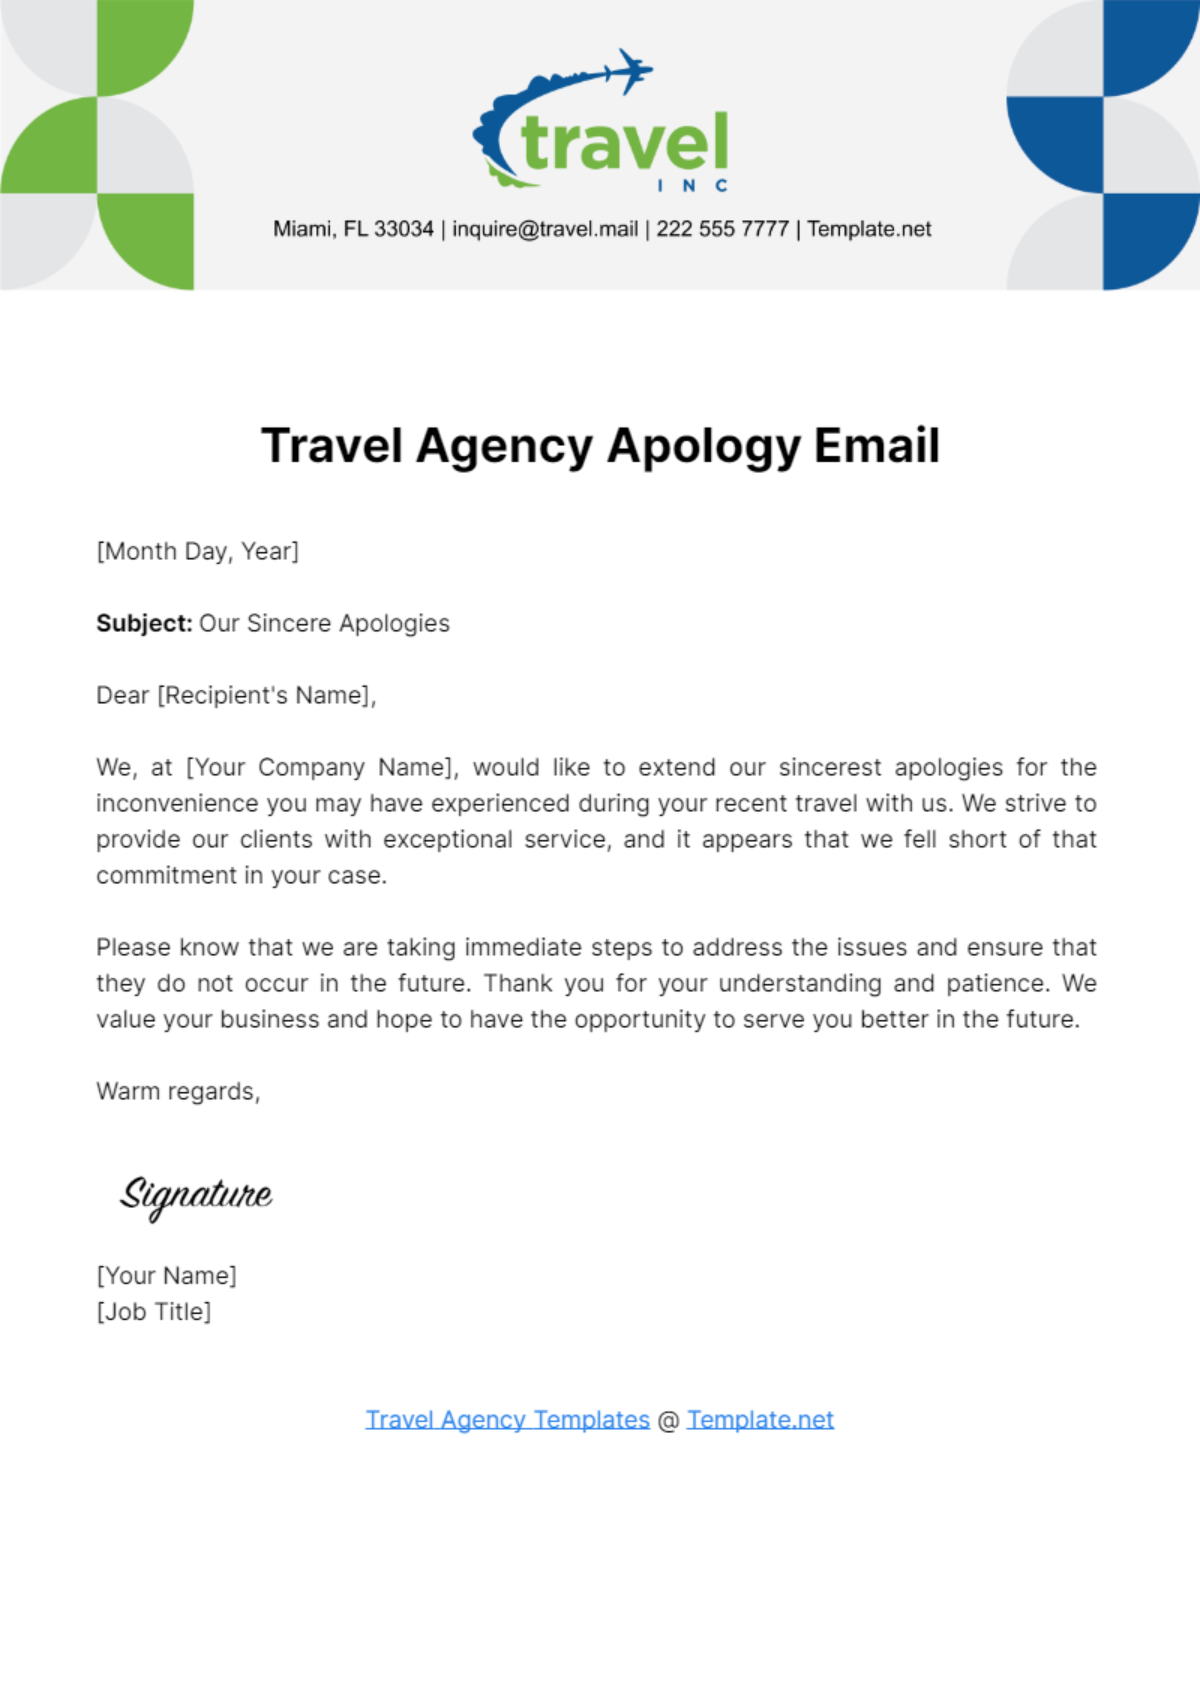 Free Travel Agency Apology Email Template